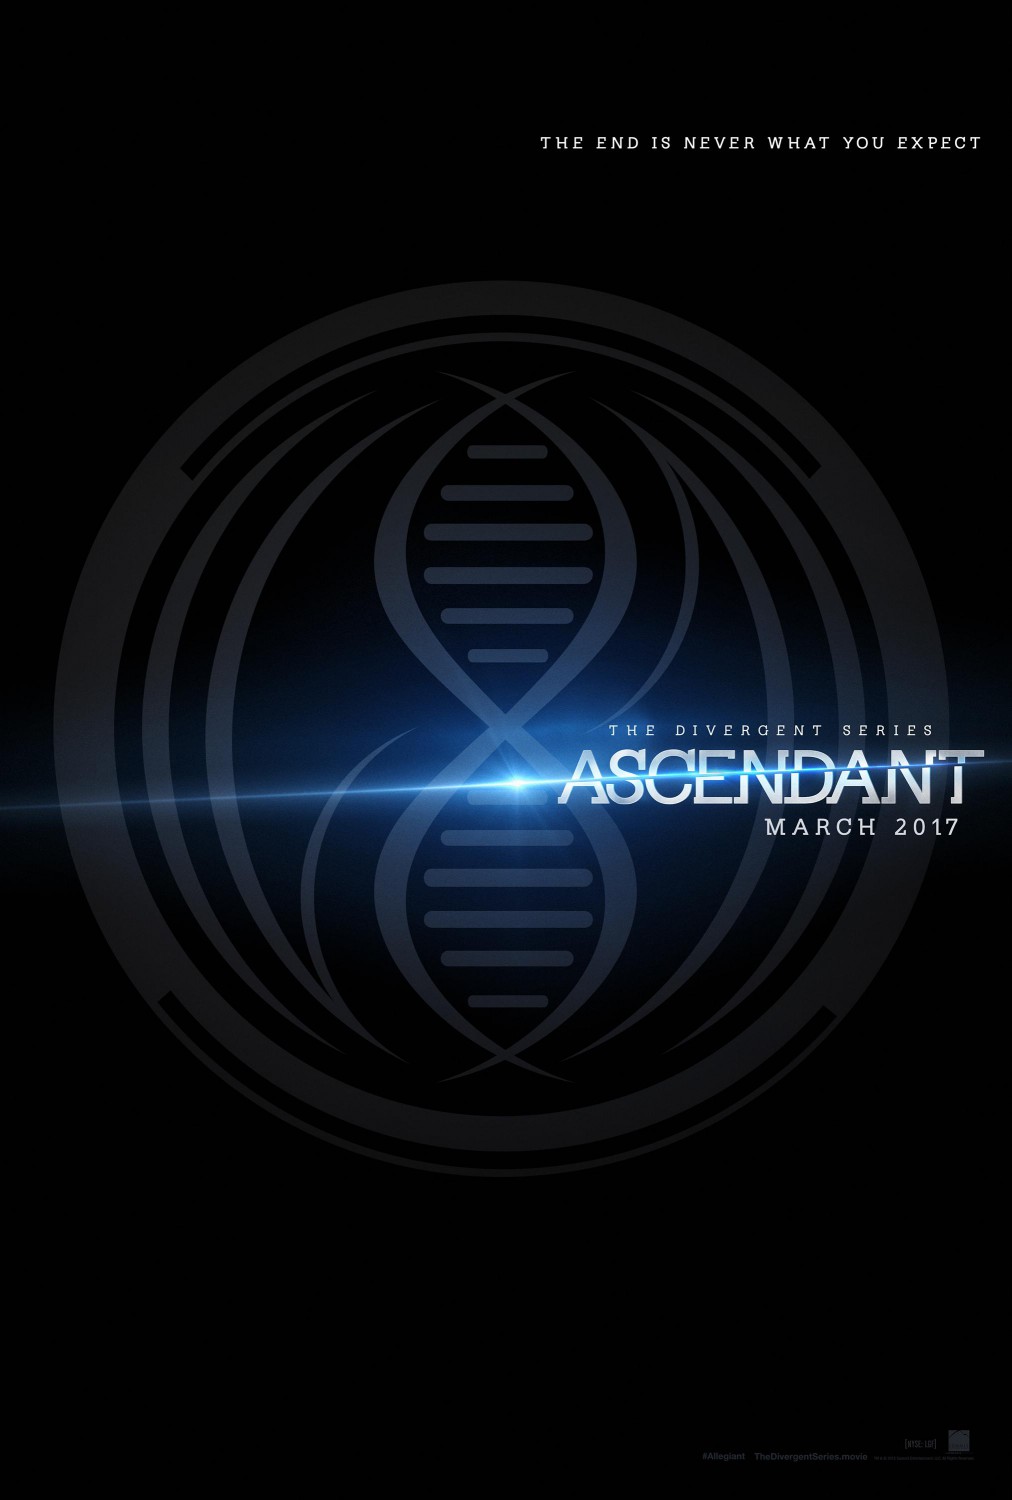 Extra Large Movie Poster Image for The Divergent Series: Ascendant 